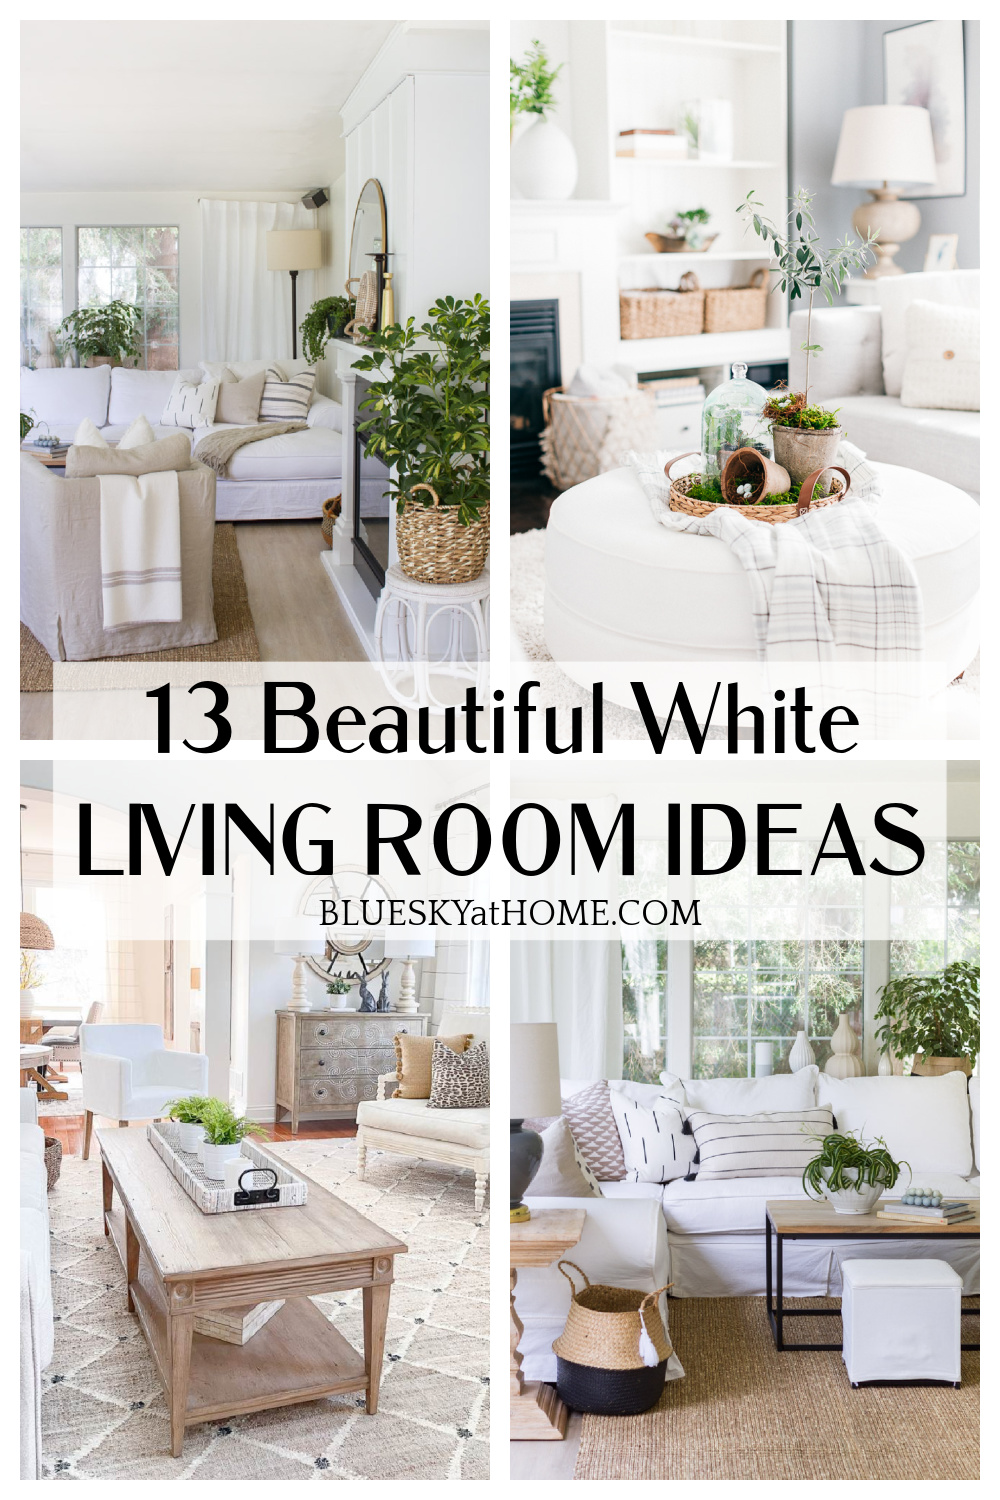 13 Beautiful White Living Room Ideas - Bluesky at Home